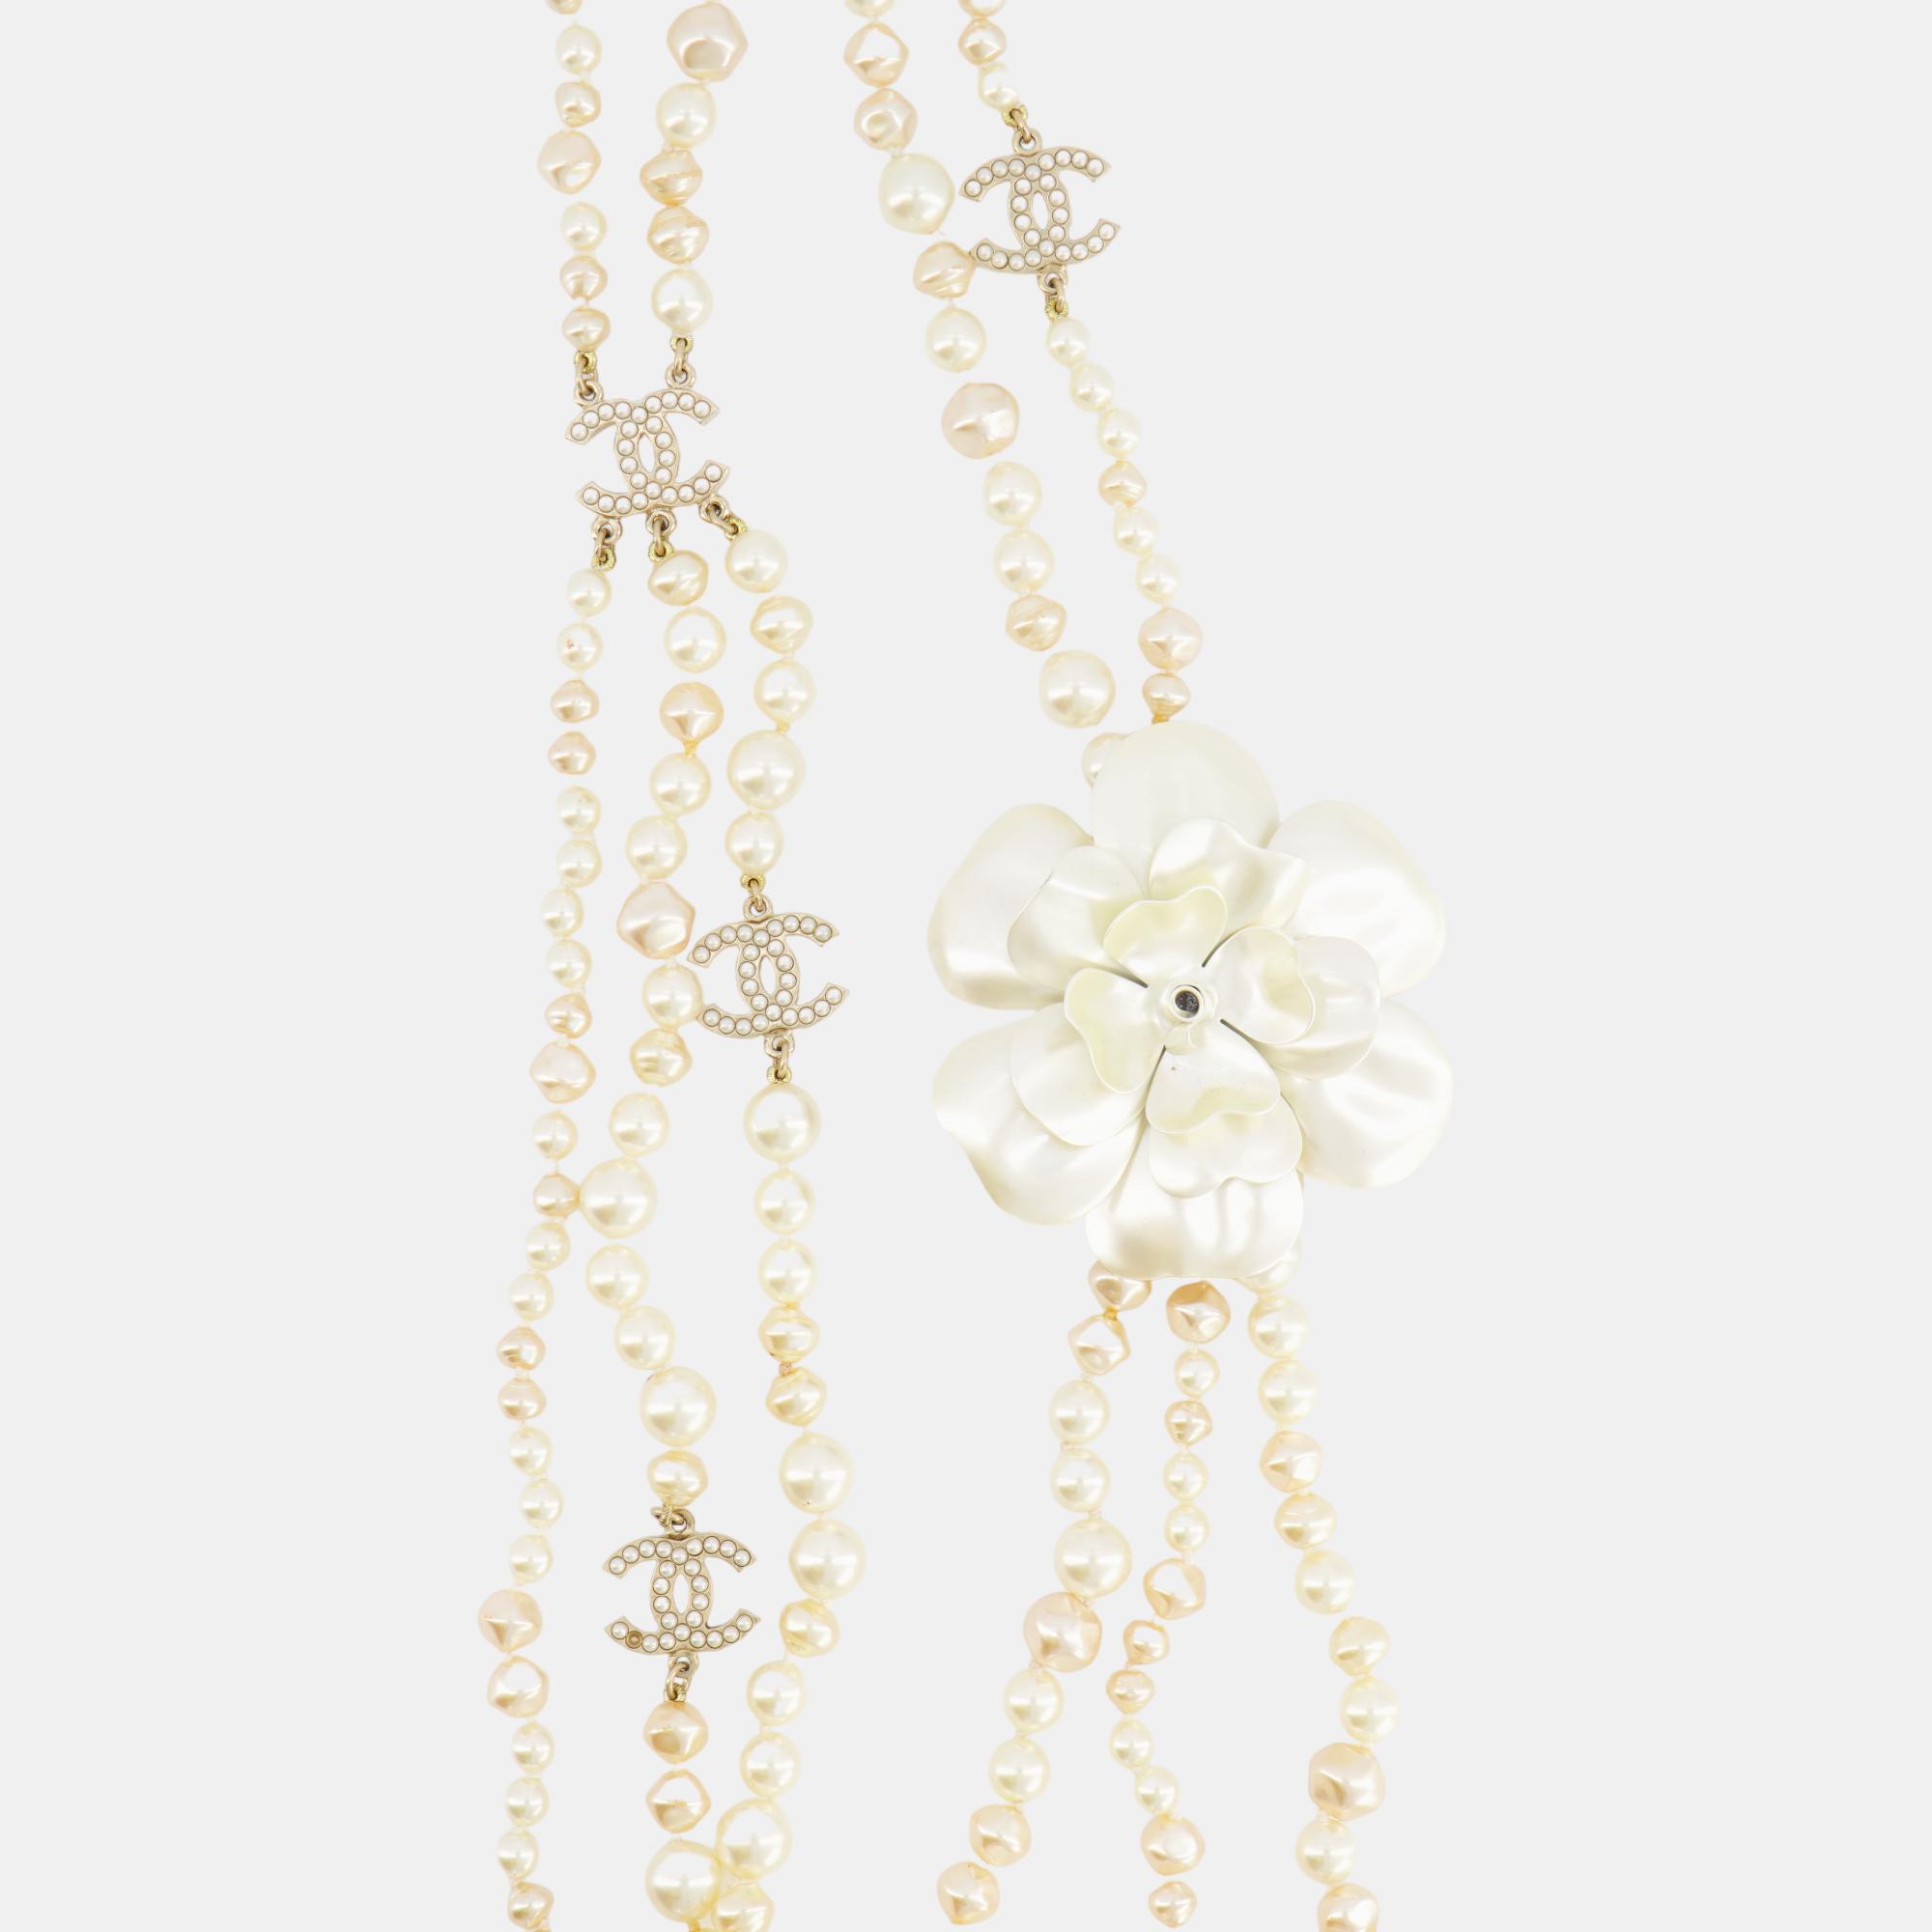 Chanel White Pearls With Gold CC Logo Details And Camelia Flower Necklace